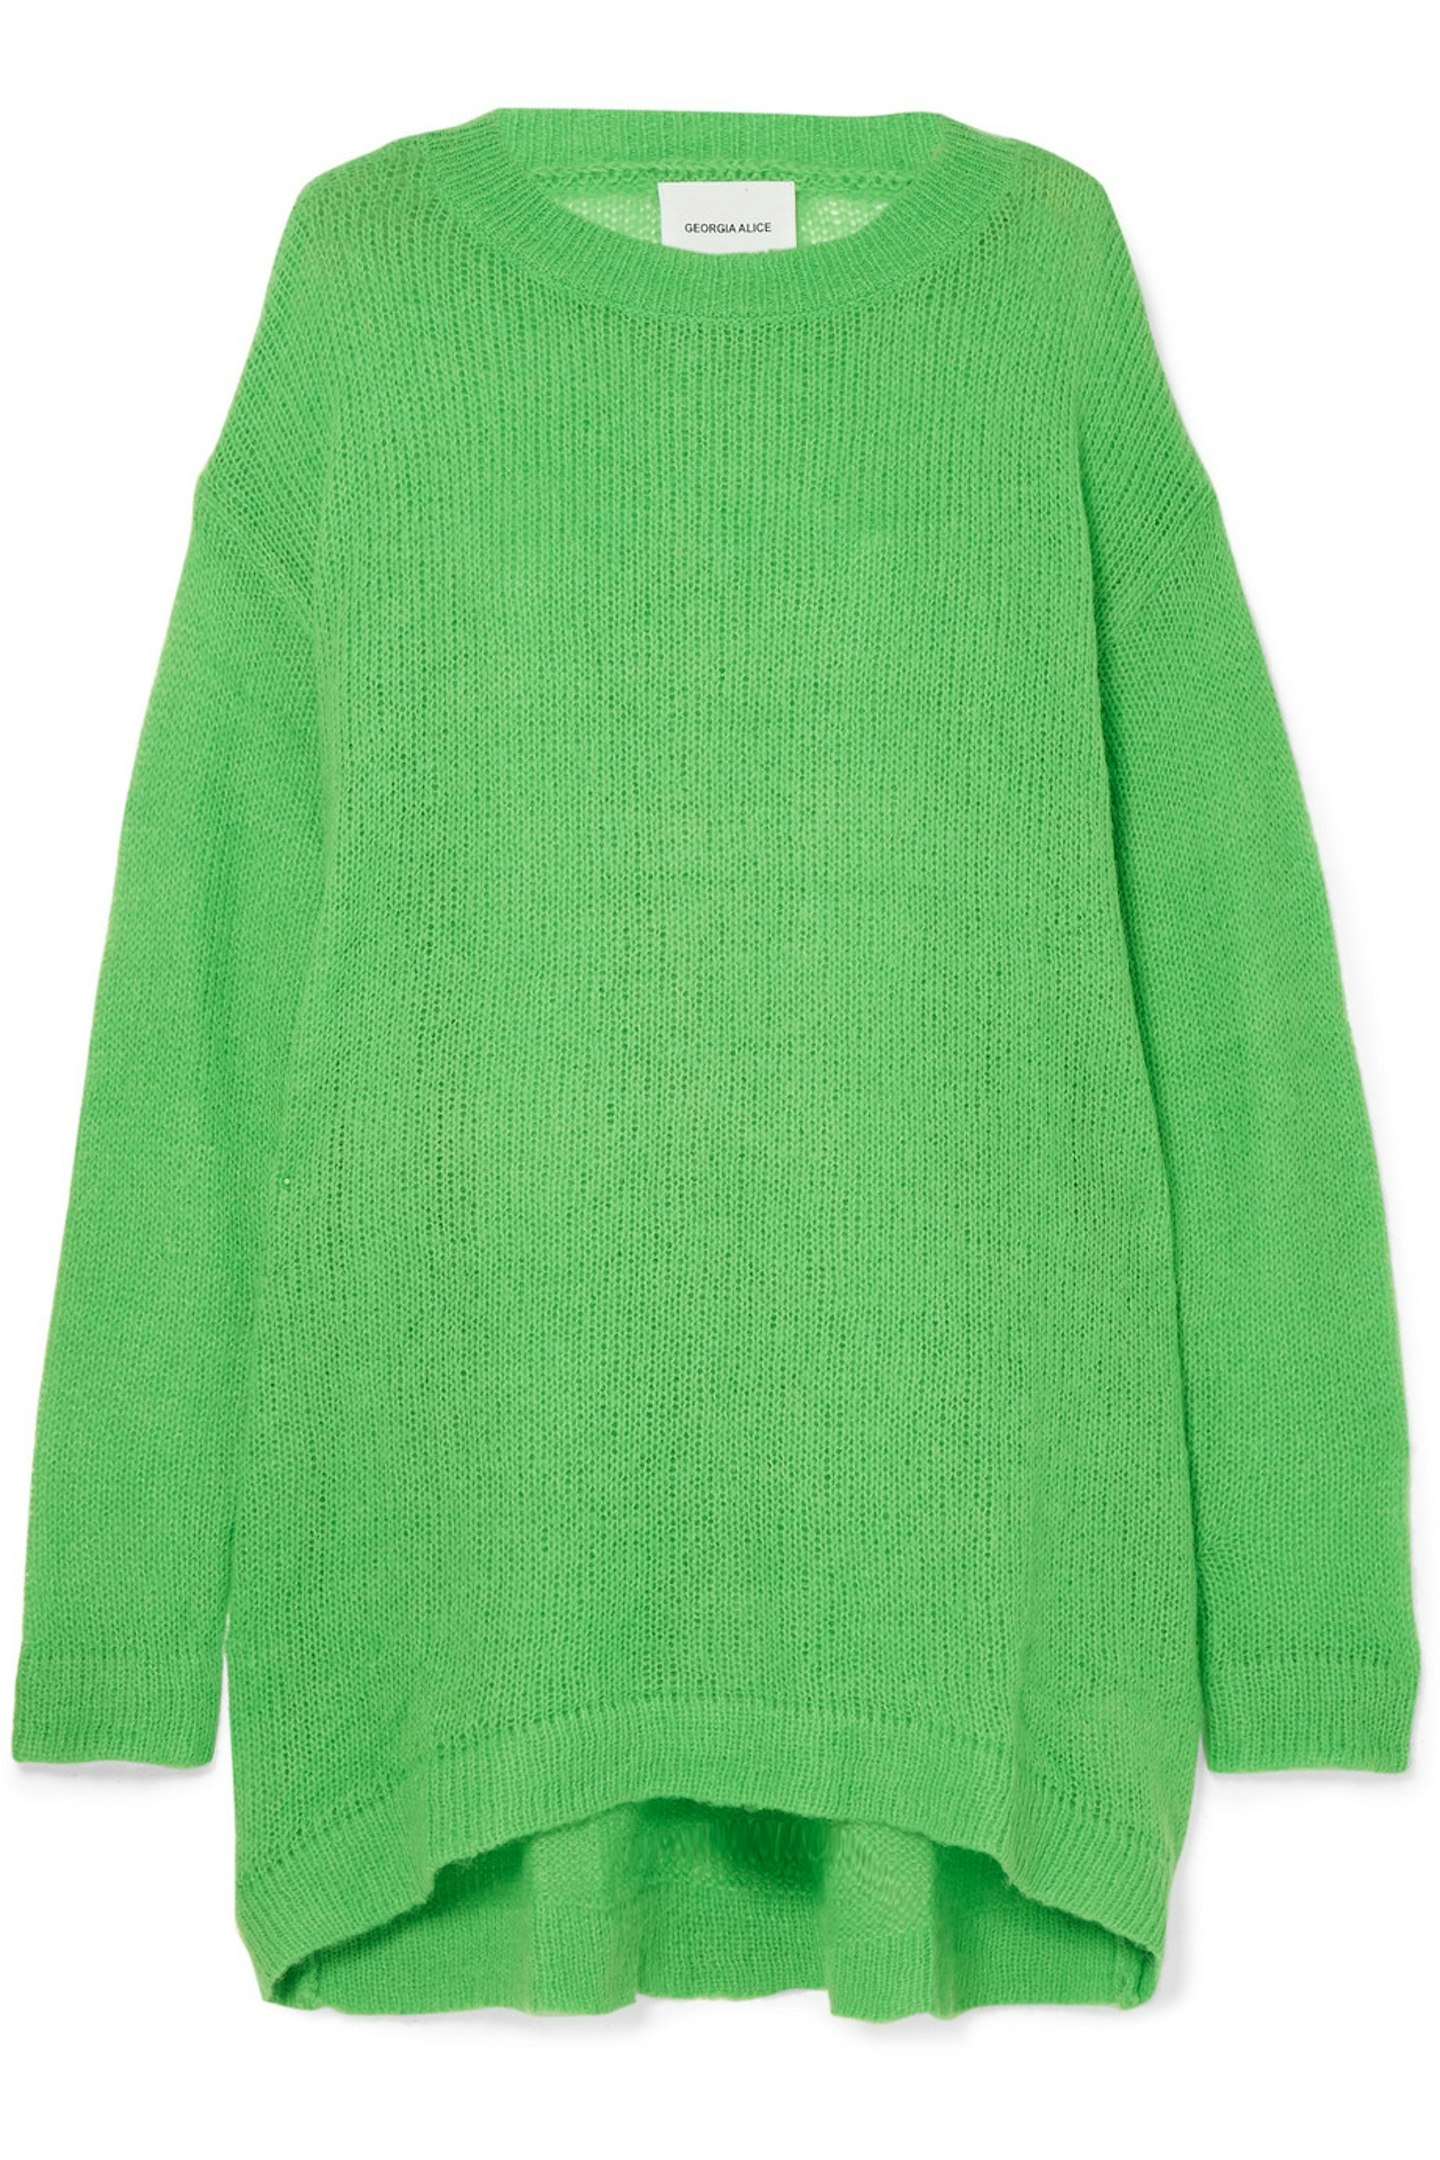 what to wear to work green jumper